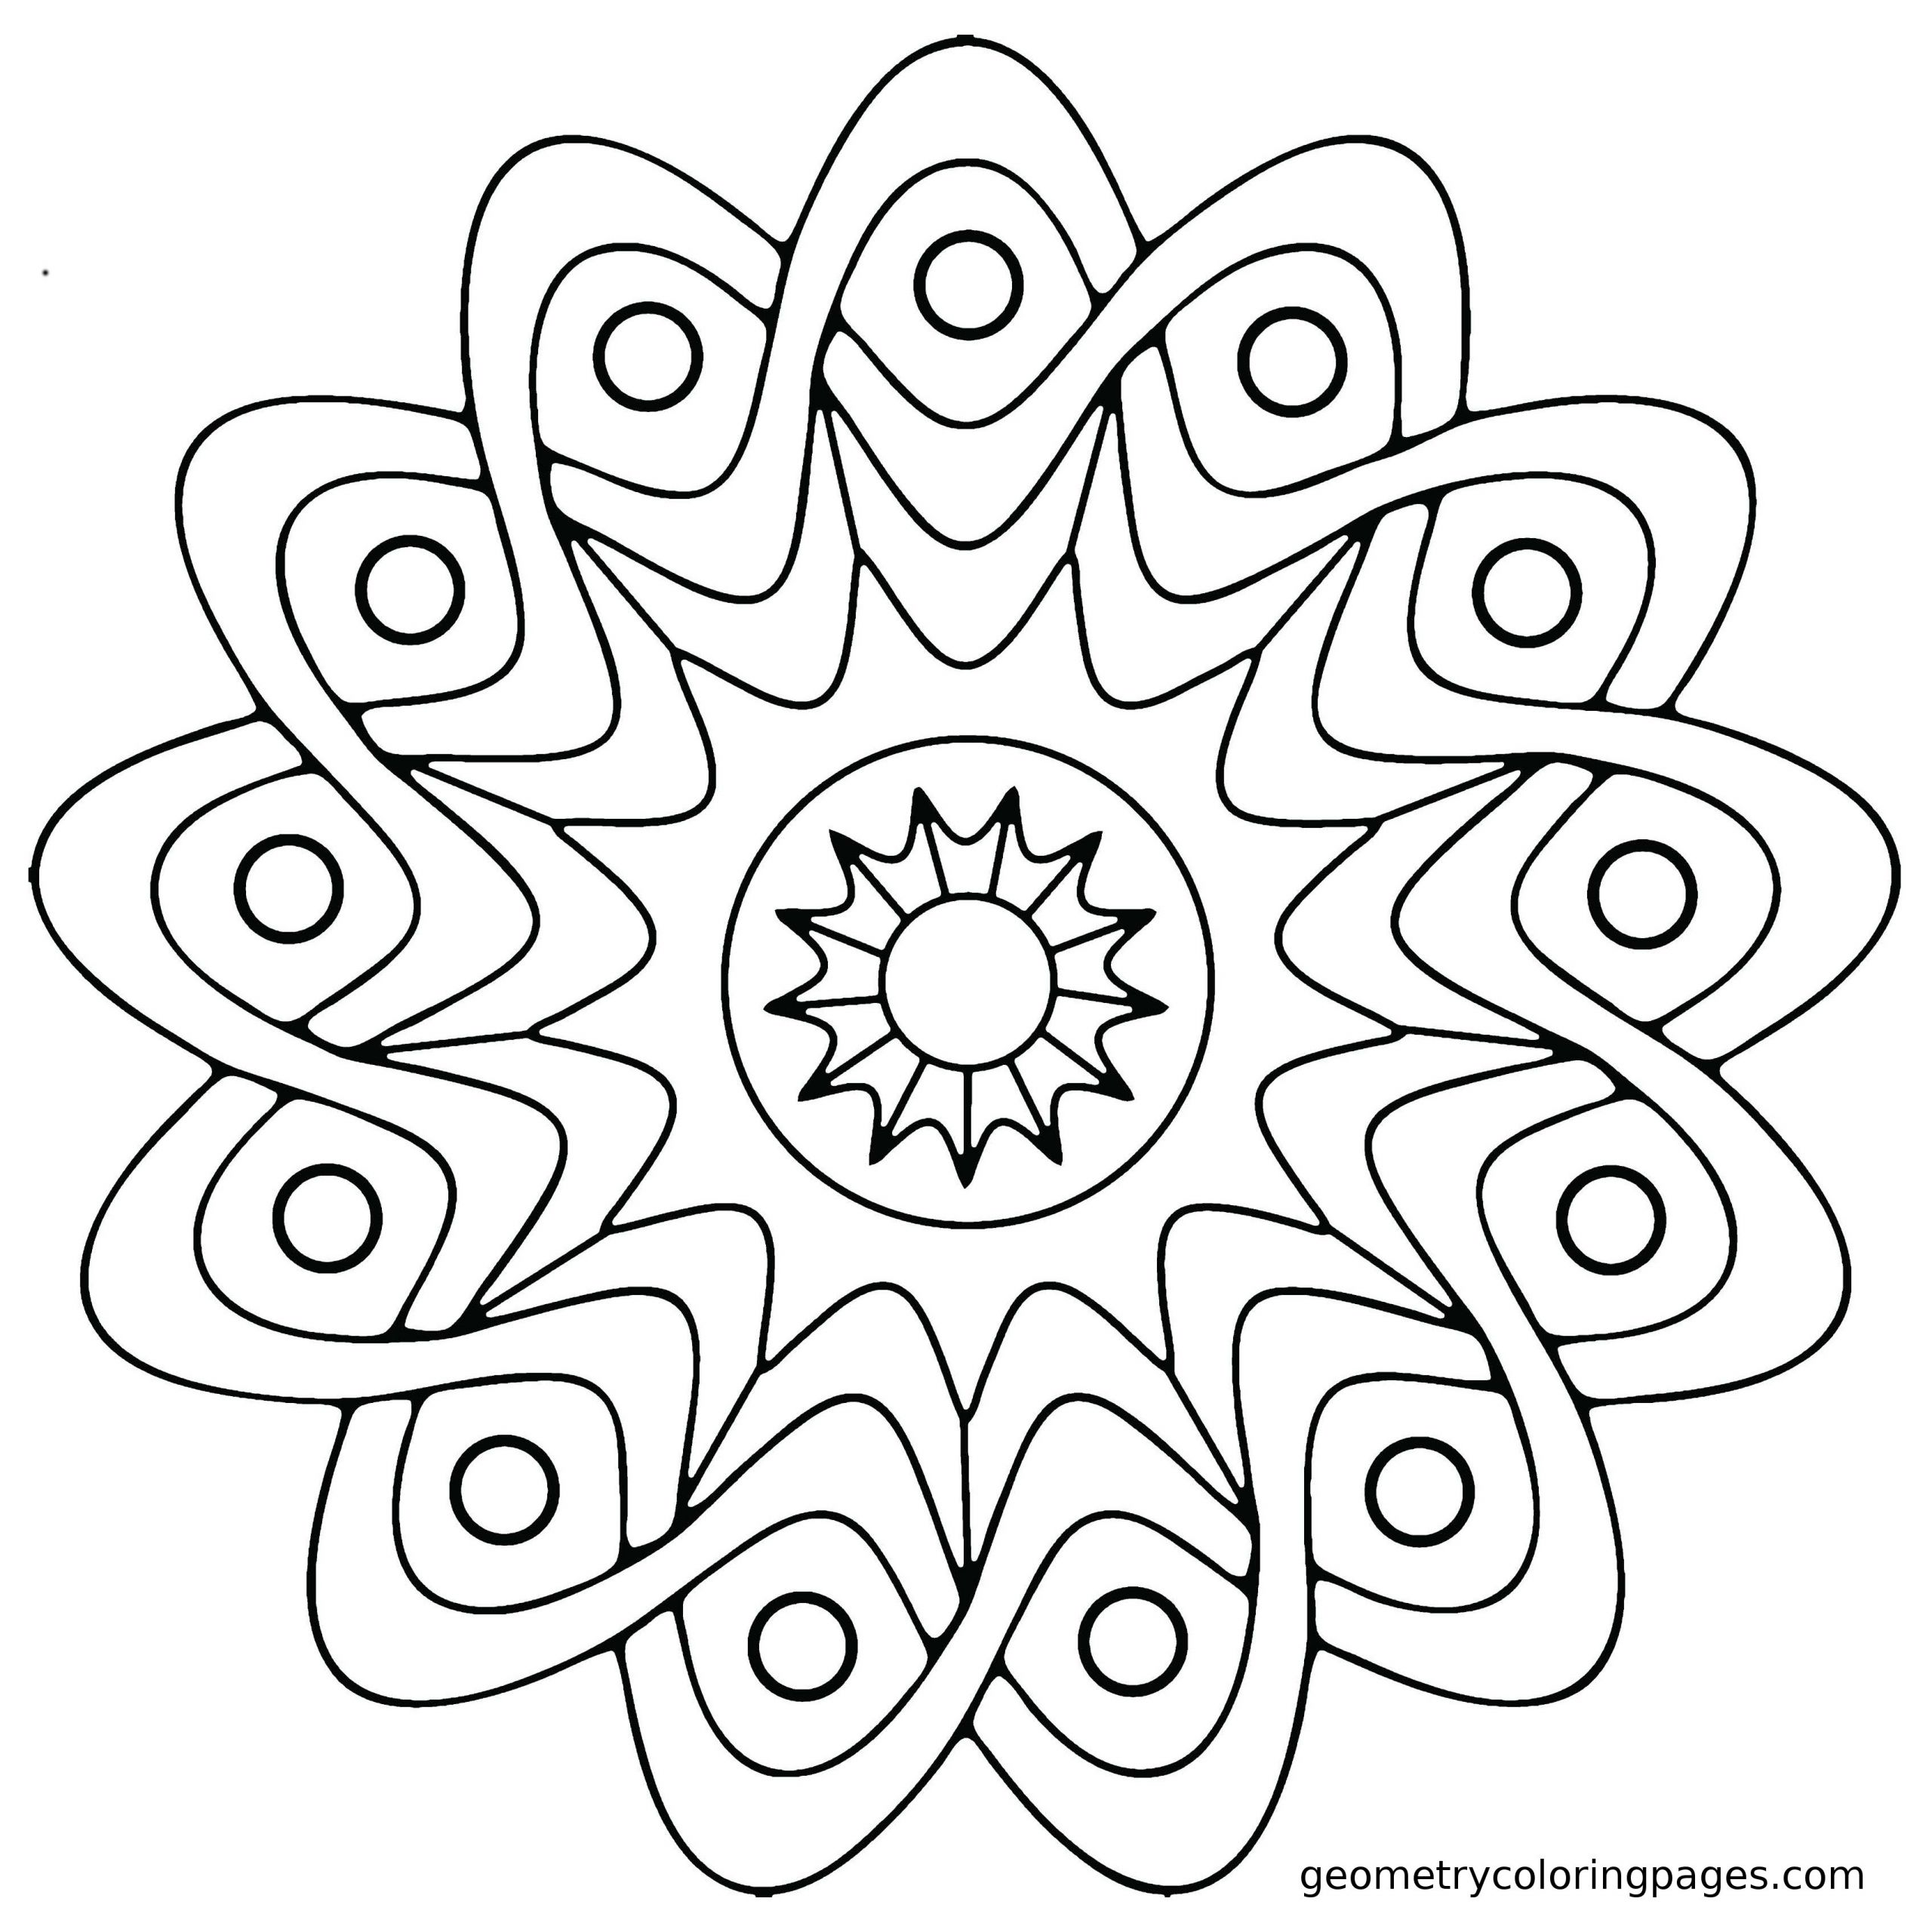 Easy Kids Coloring Pages
 Easy Coloring Pages For Kids at GetColorings